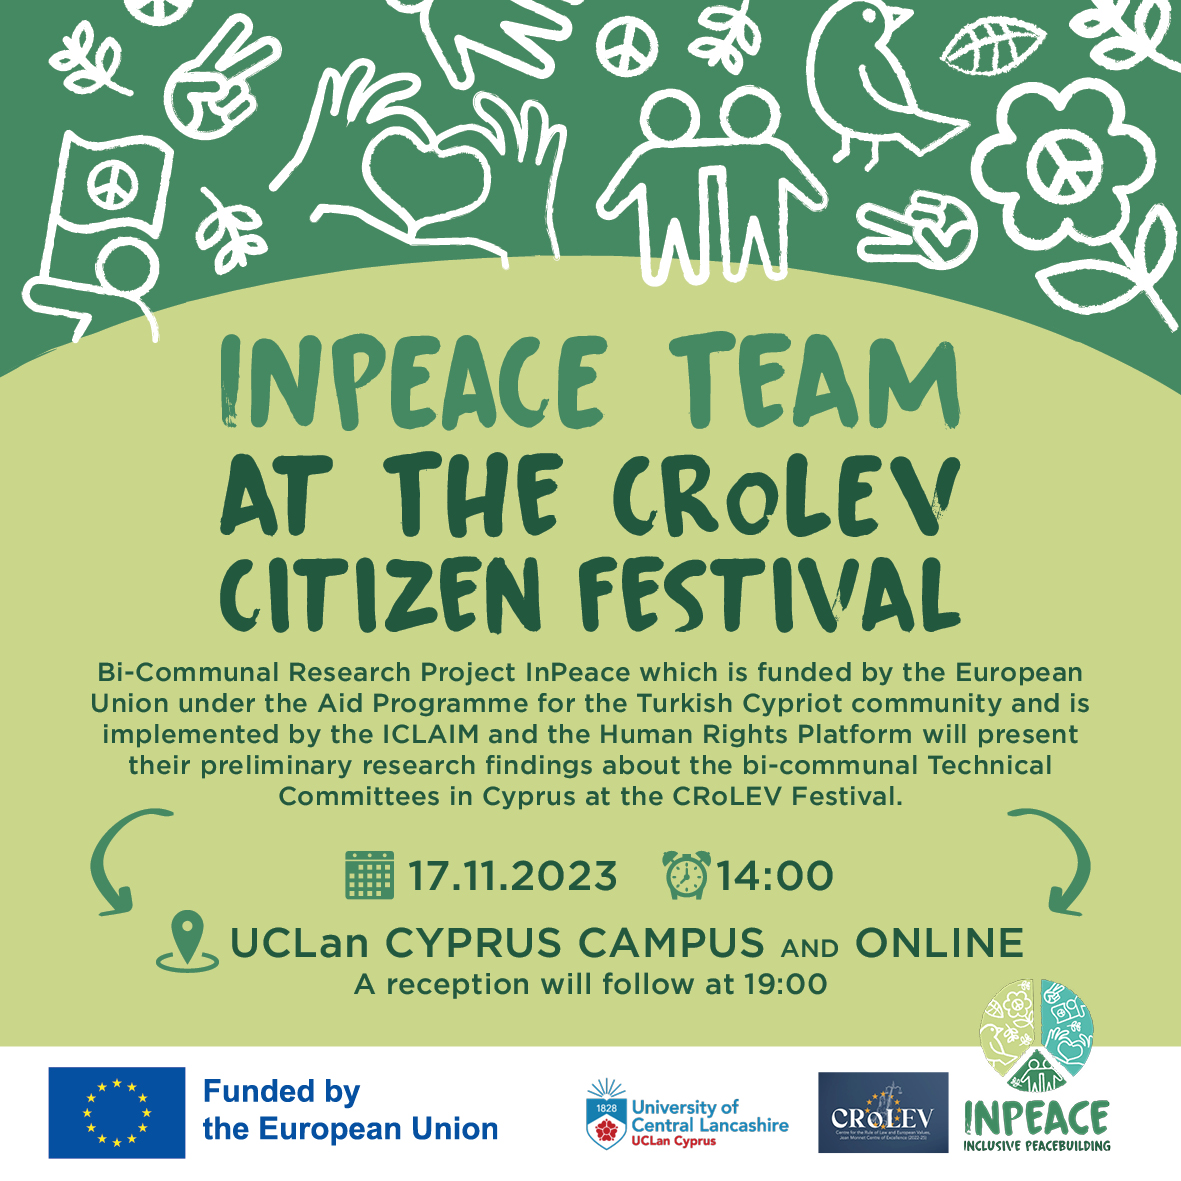  Inpeace team at the crolev citizen festival 17-11-2023 at 14:00